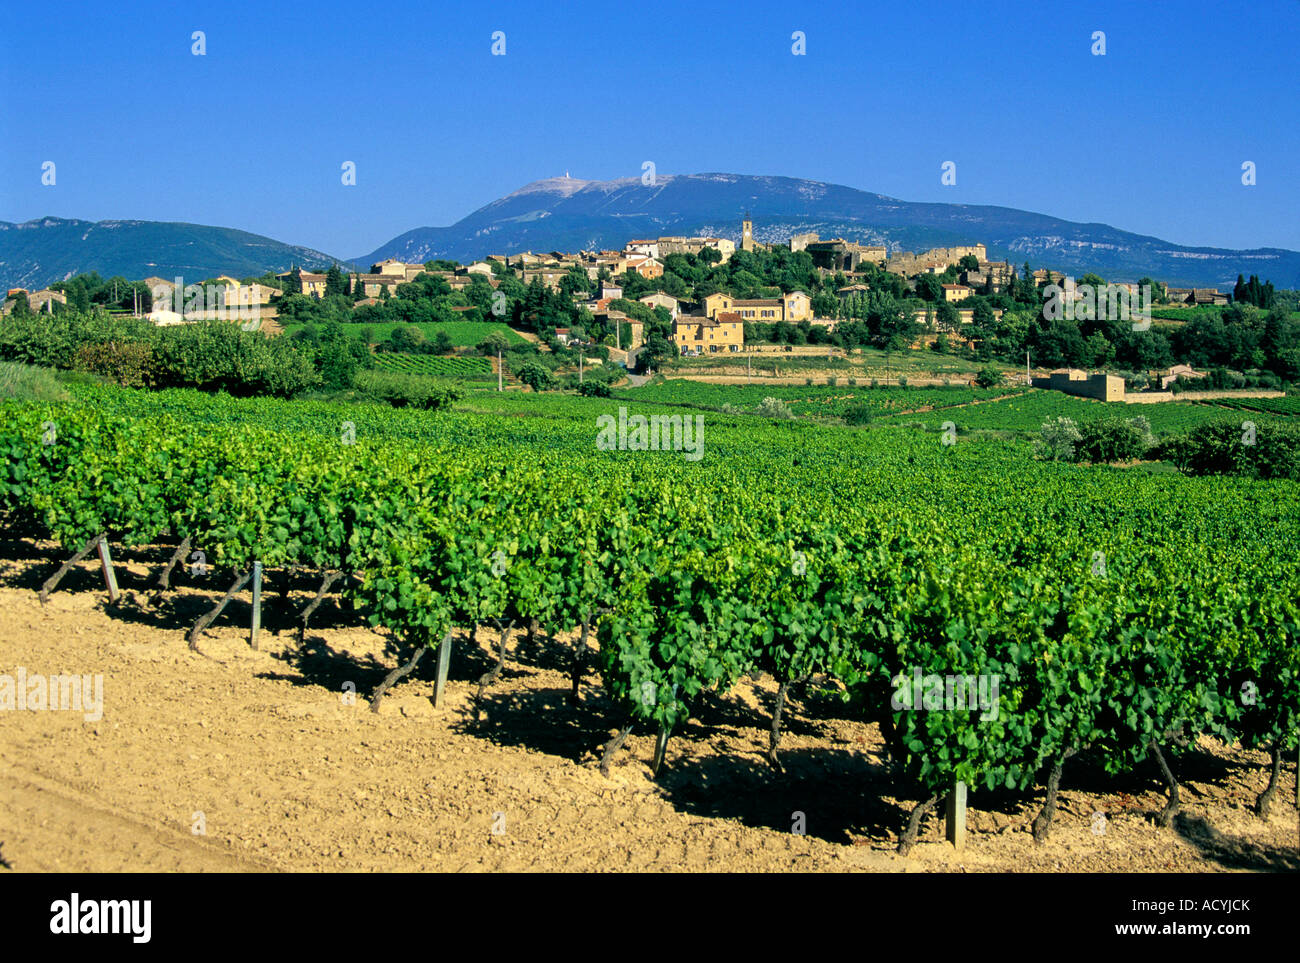 Provence, France - Village of Faucon and famous vineyards, Vaucluse region, Provence Stock Photo